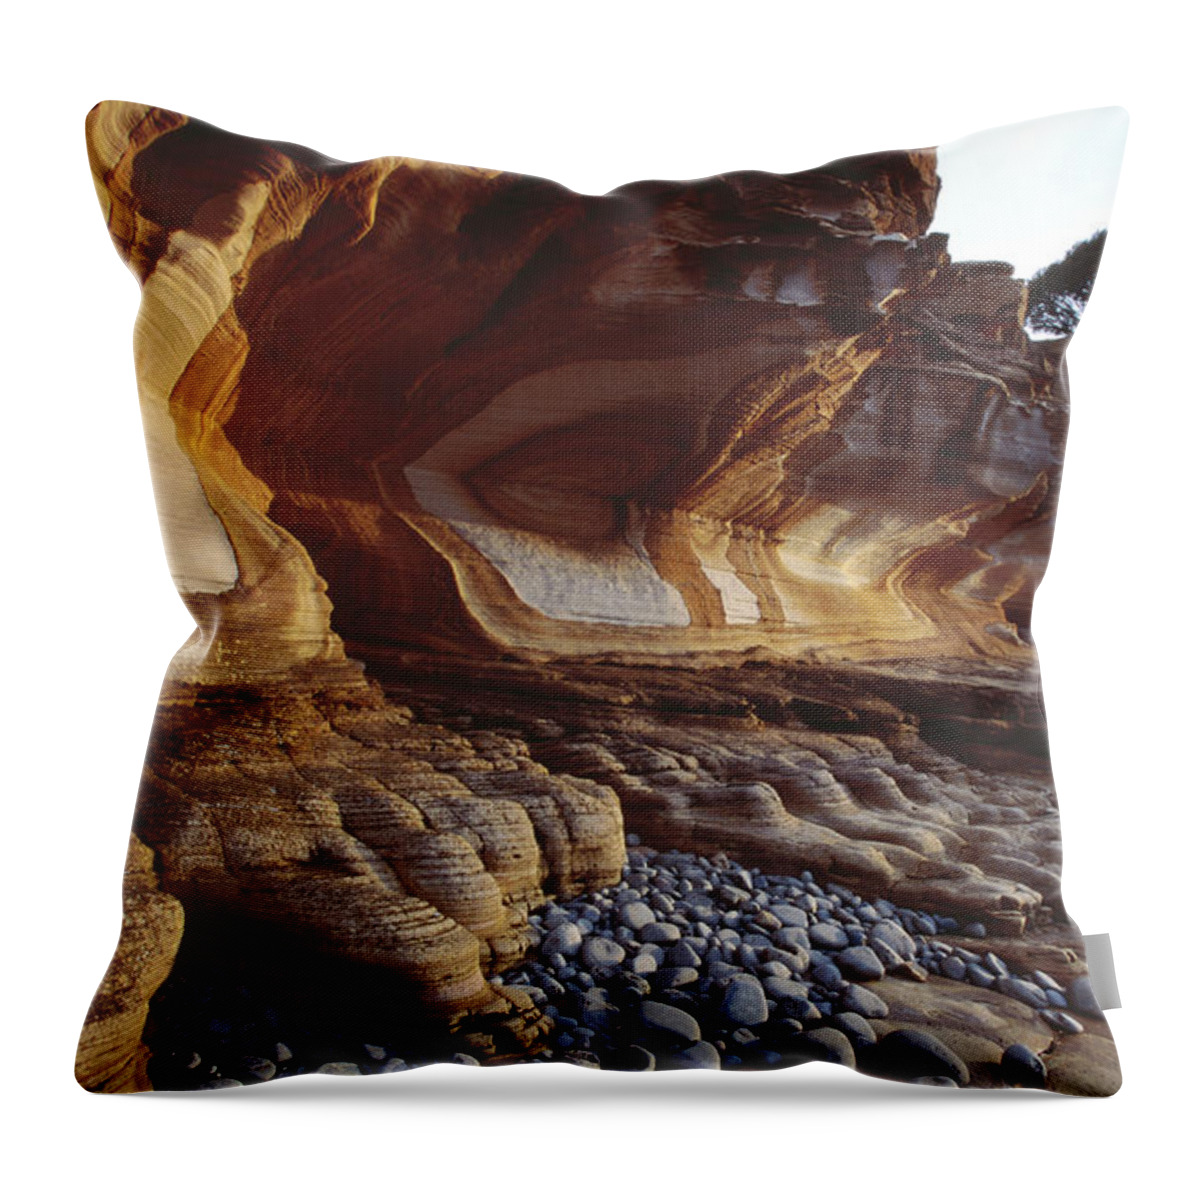 Toughness Throw Pillow featuring the photograph Painted Cliffs, Maria Island National by Holger Leue